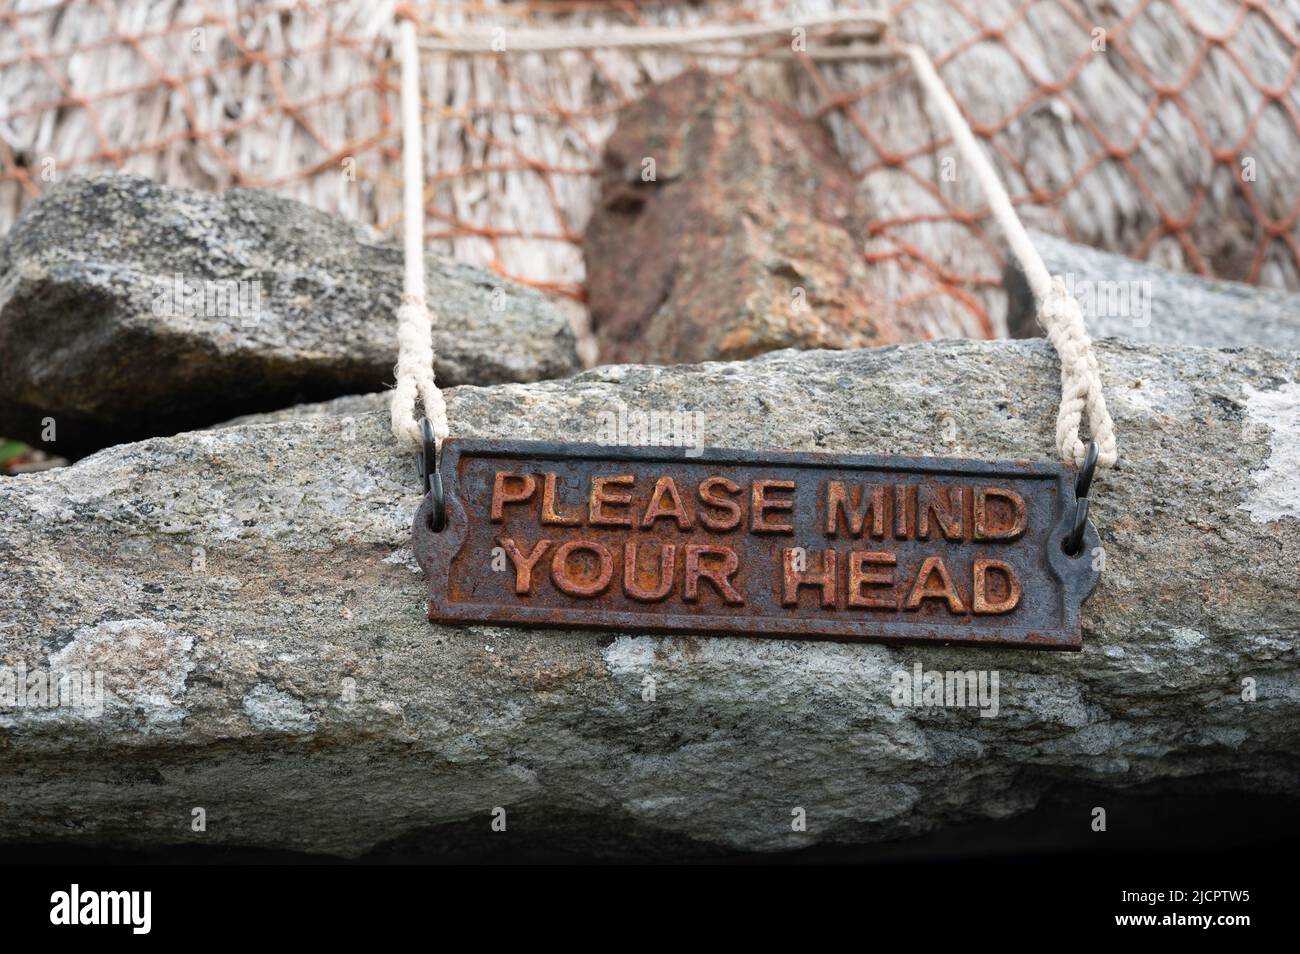 Rustic metal please mind your head sign on stone with blurred background of thatched roof. Norse mill, Shawbost, Isle of Lewis, Scotland, UK. Stock Photo